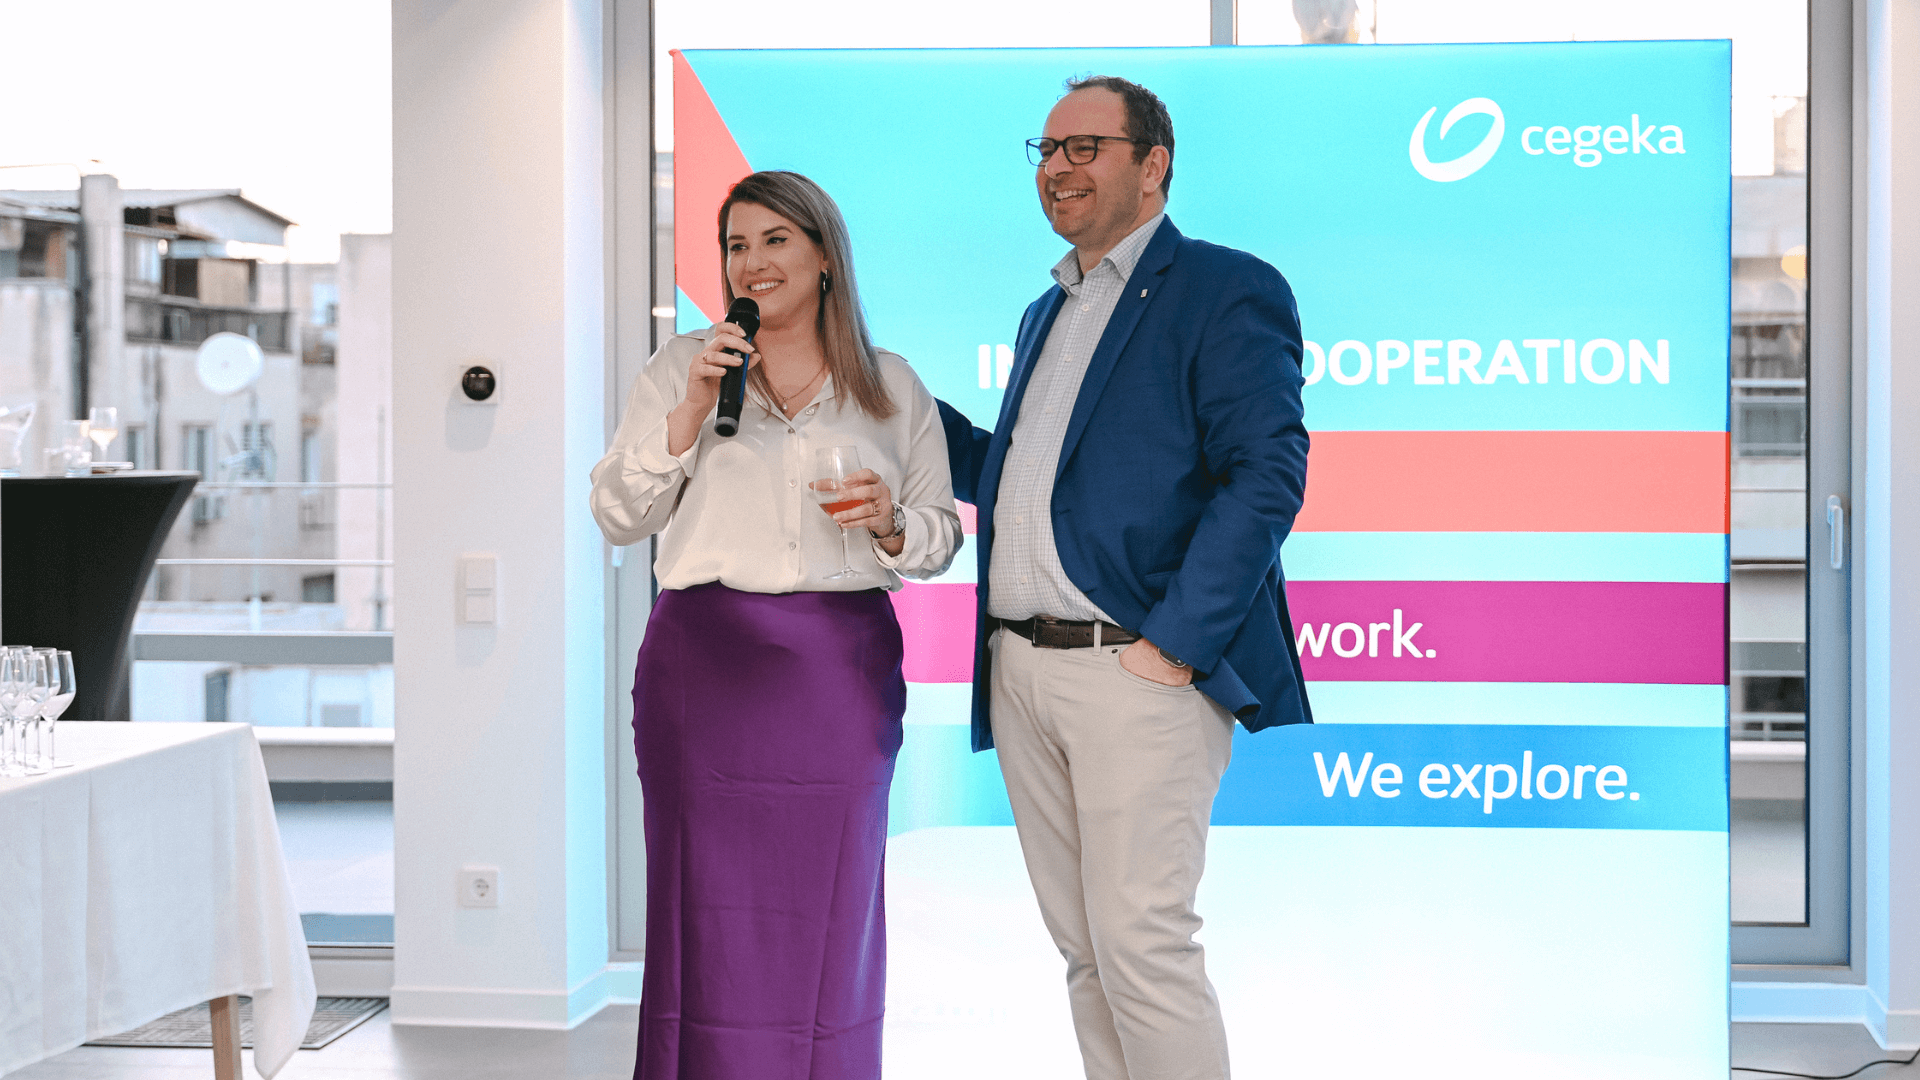 Cegeka_pressrelease_Cegeka expands presence in Greece with new office in Athens_1920x1080px_1-1